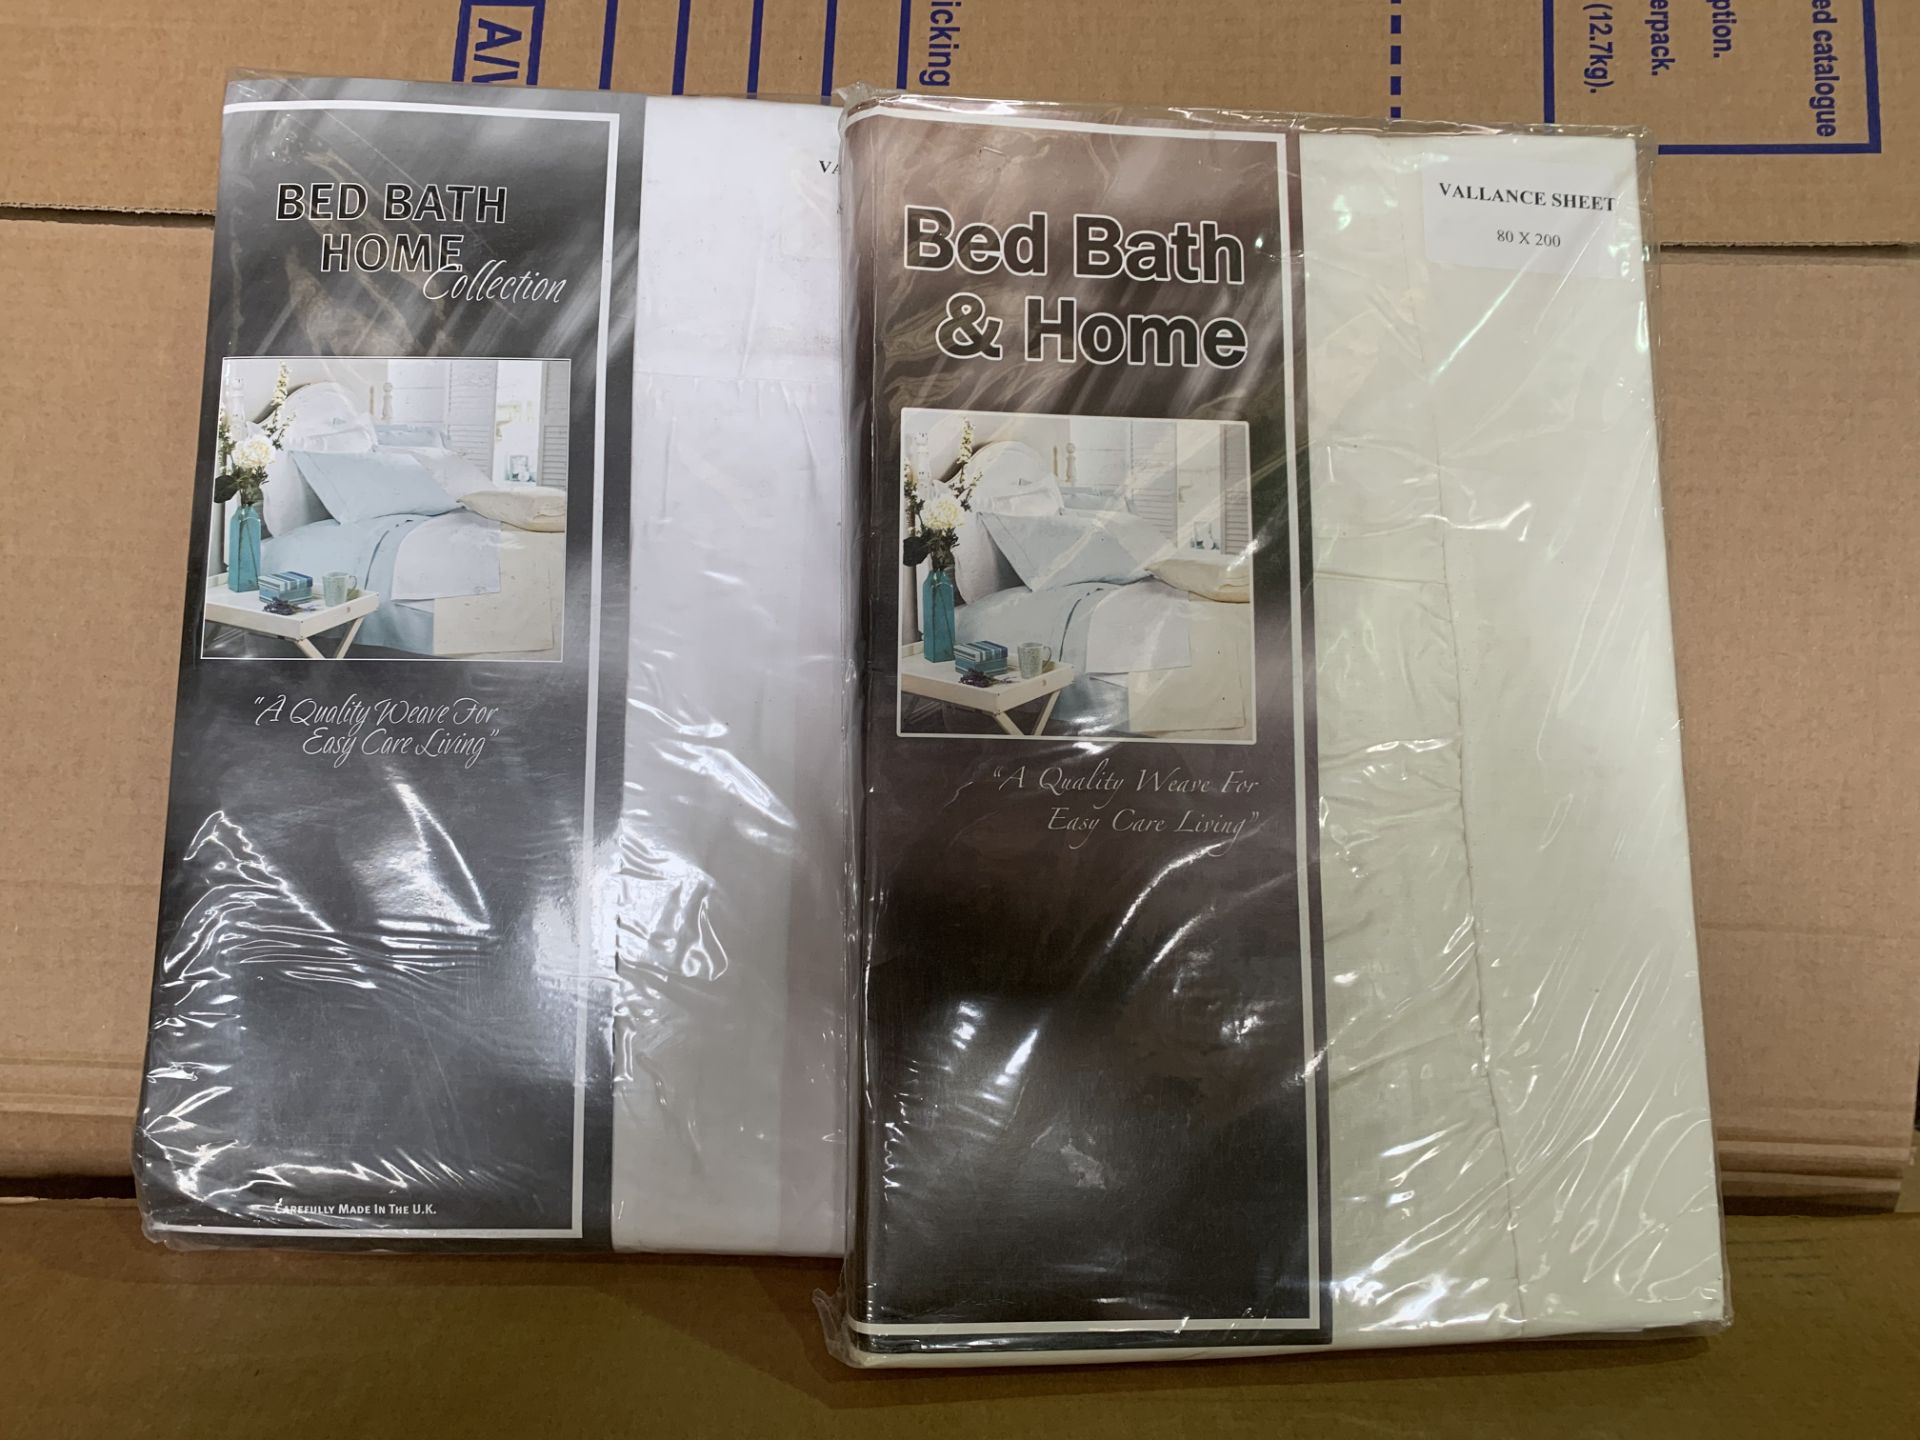 20 X BRAND NEW BED BATH AND HOME VALANCE SHEETS 80 X 200 (COLOURS MAY VARY BETWEEN CREAM AND WHITE